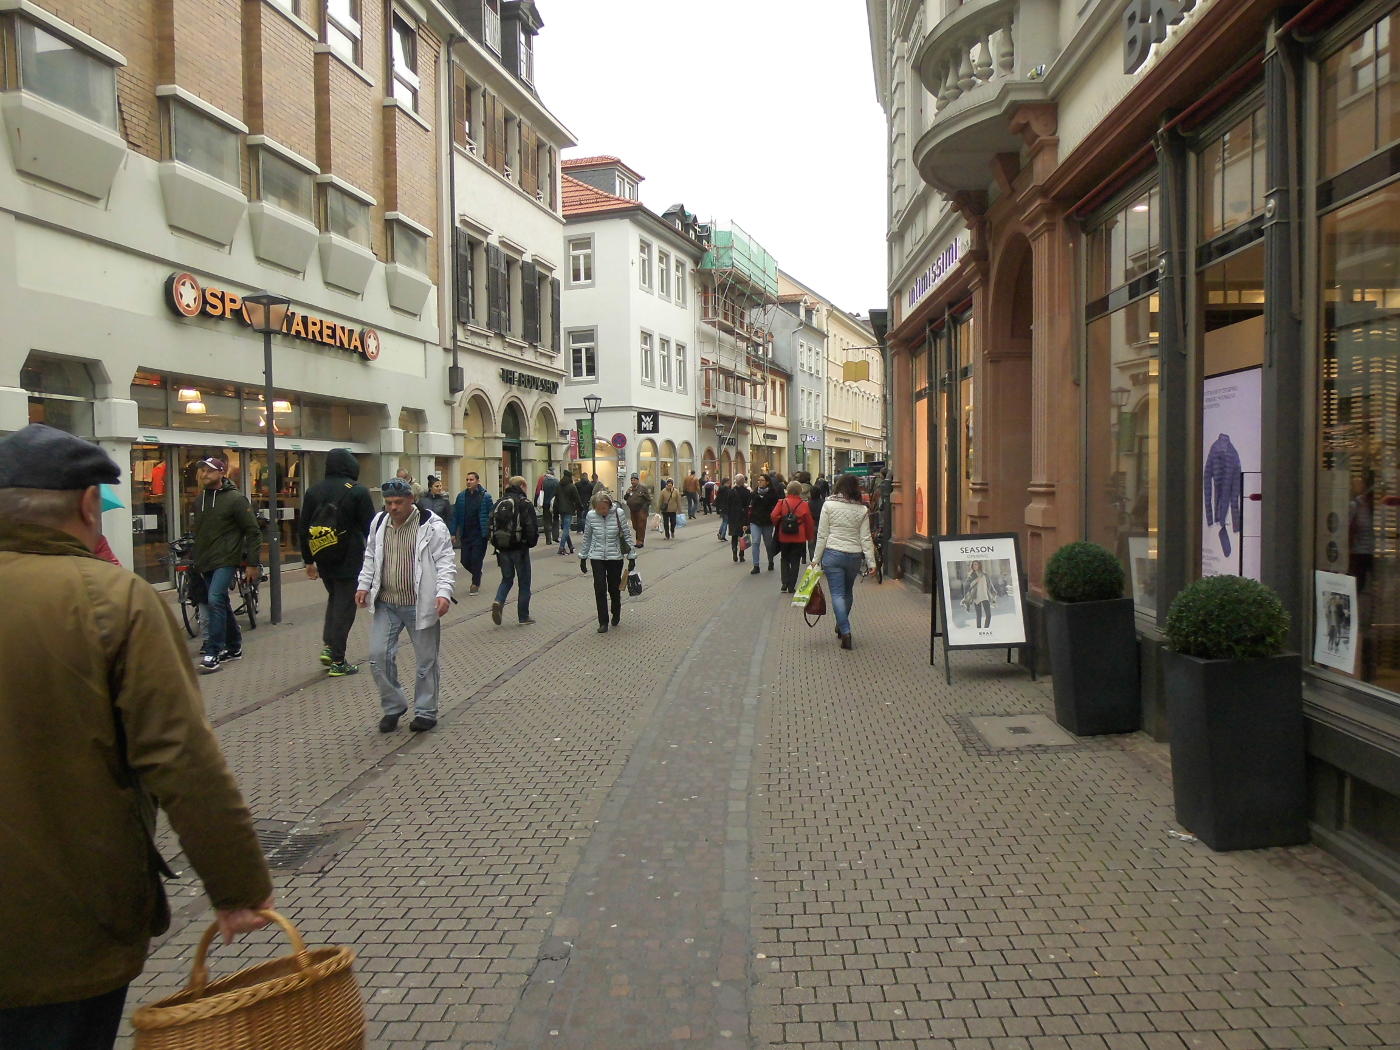 No Jehovah's Witnesses in Heidelberg